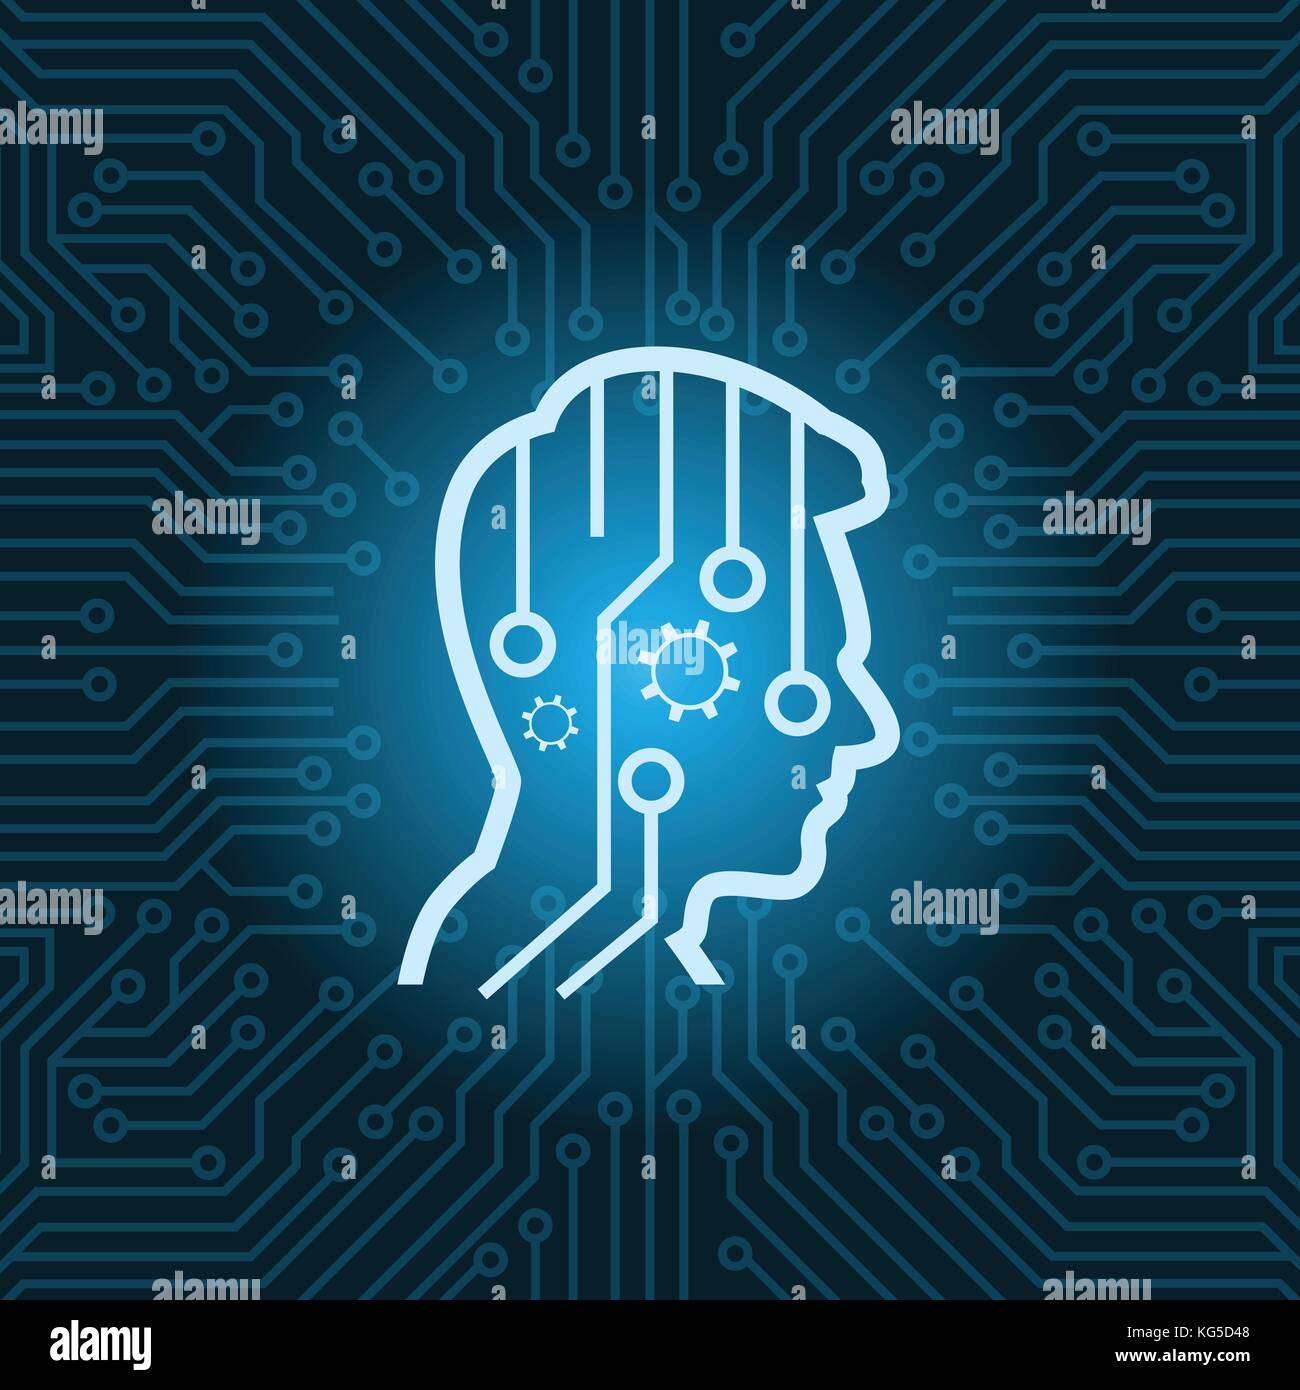 Human Head Digital Thinking Icon Over Blue Circuit Motherboard Stock ...